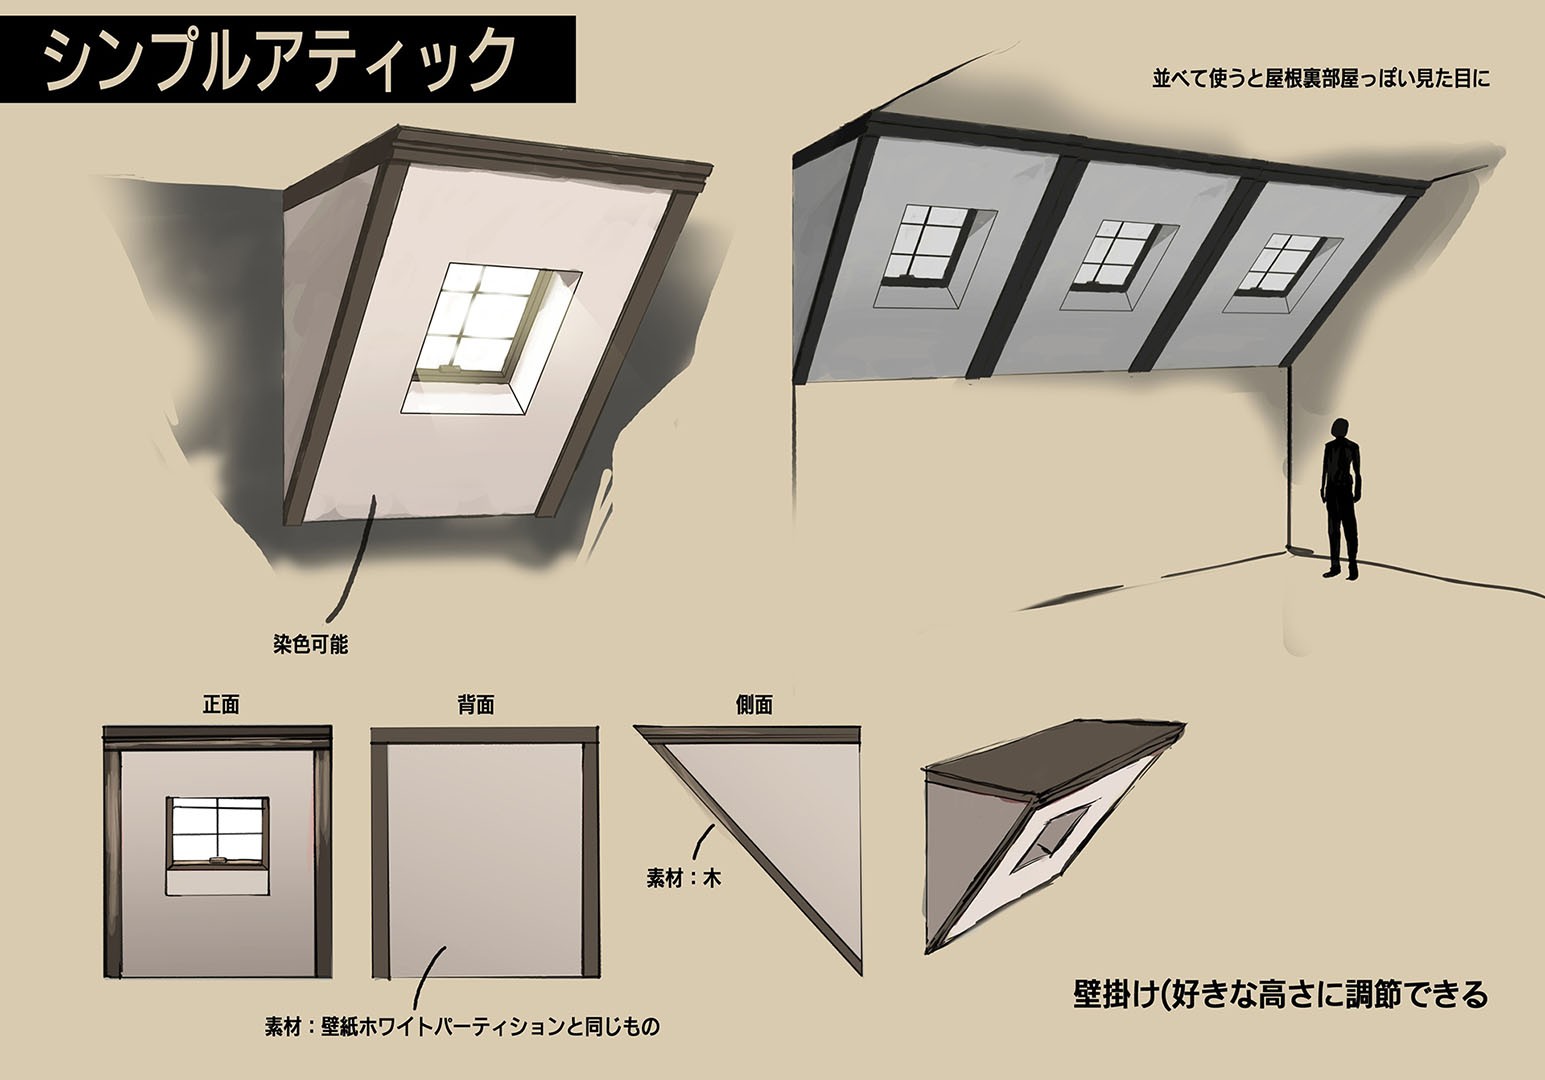 Announcing The Winners Of The Furnishing Design Contest 19 Final Fantasy Xiv The Lodestone